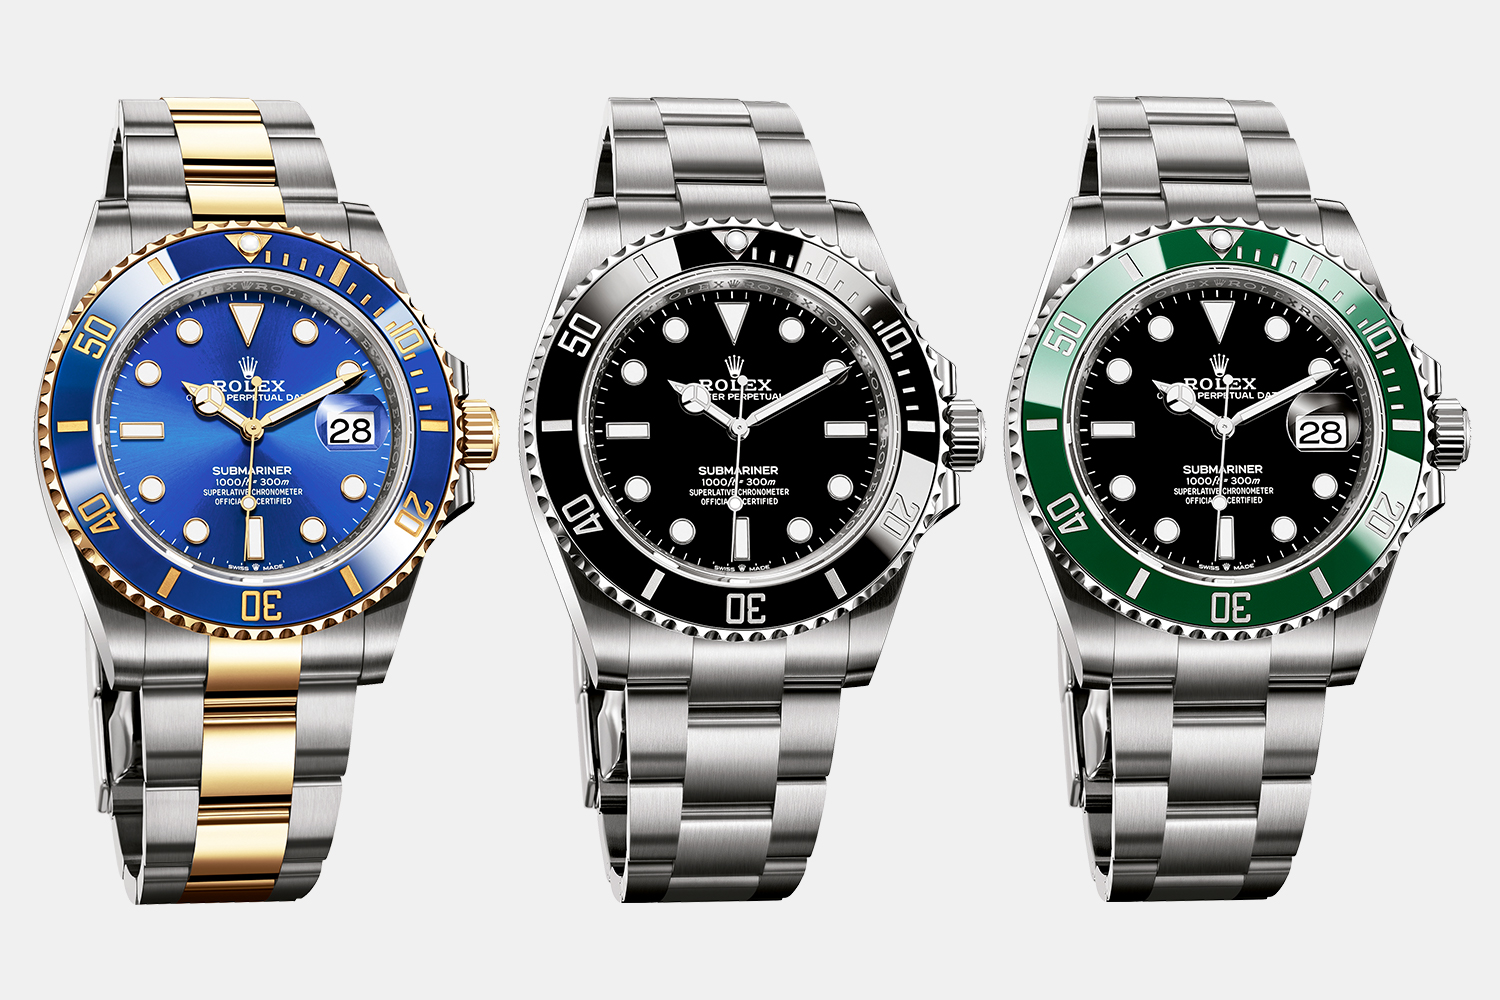 where can i buy a new rolex submariner